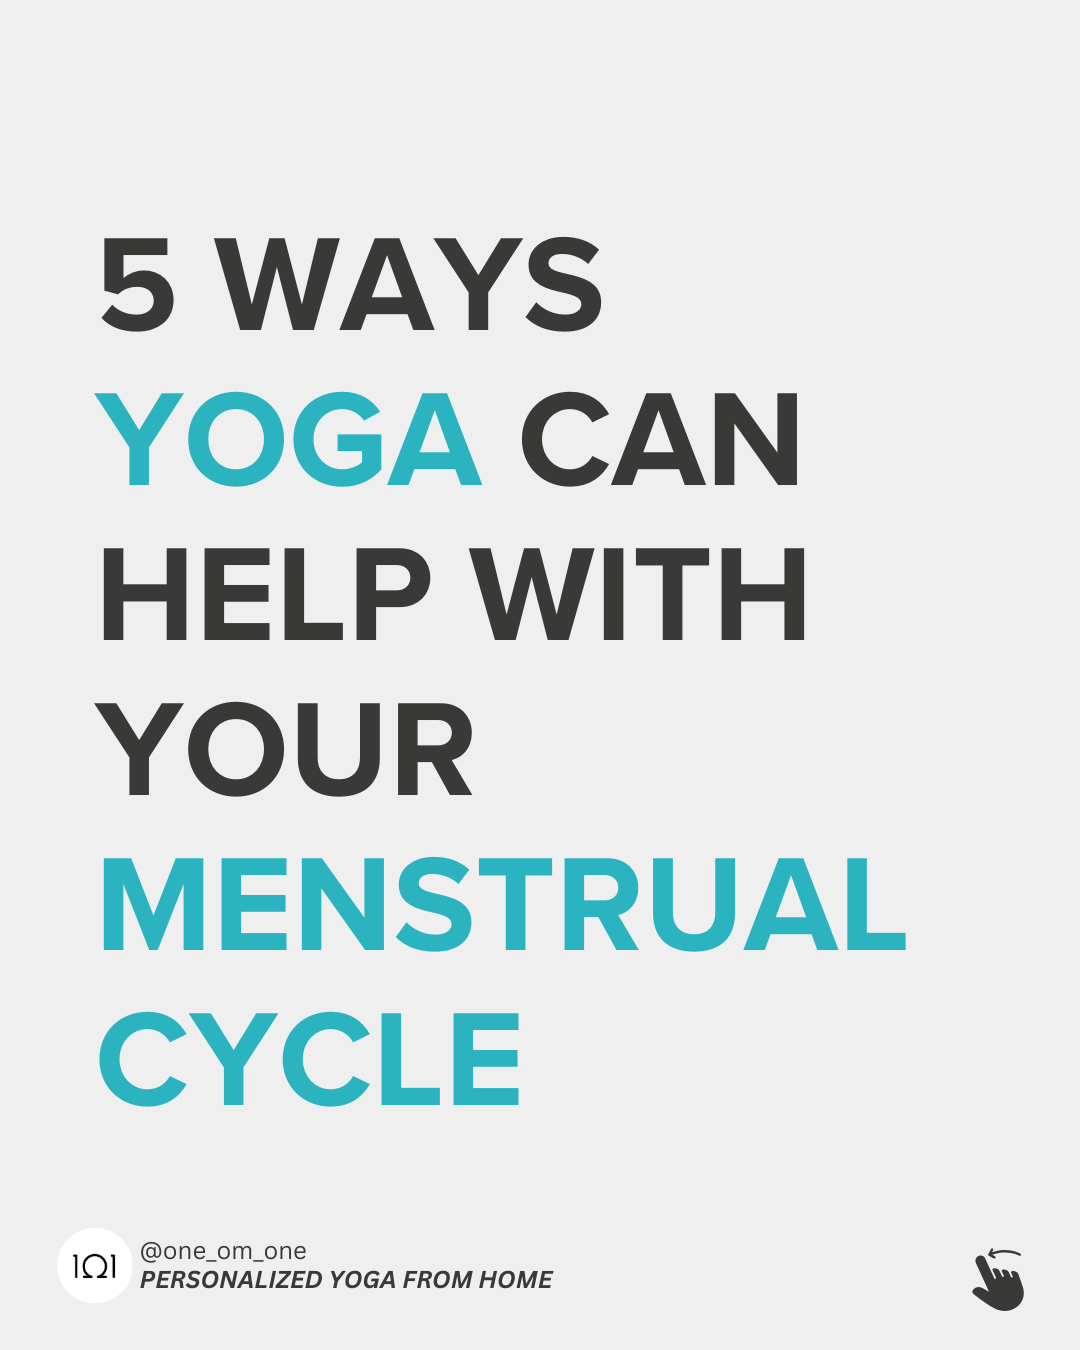 5 ways yoga can help with your menstrual cycle